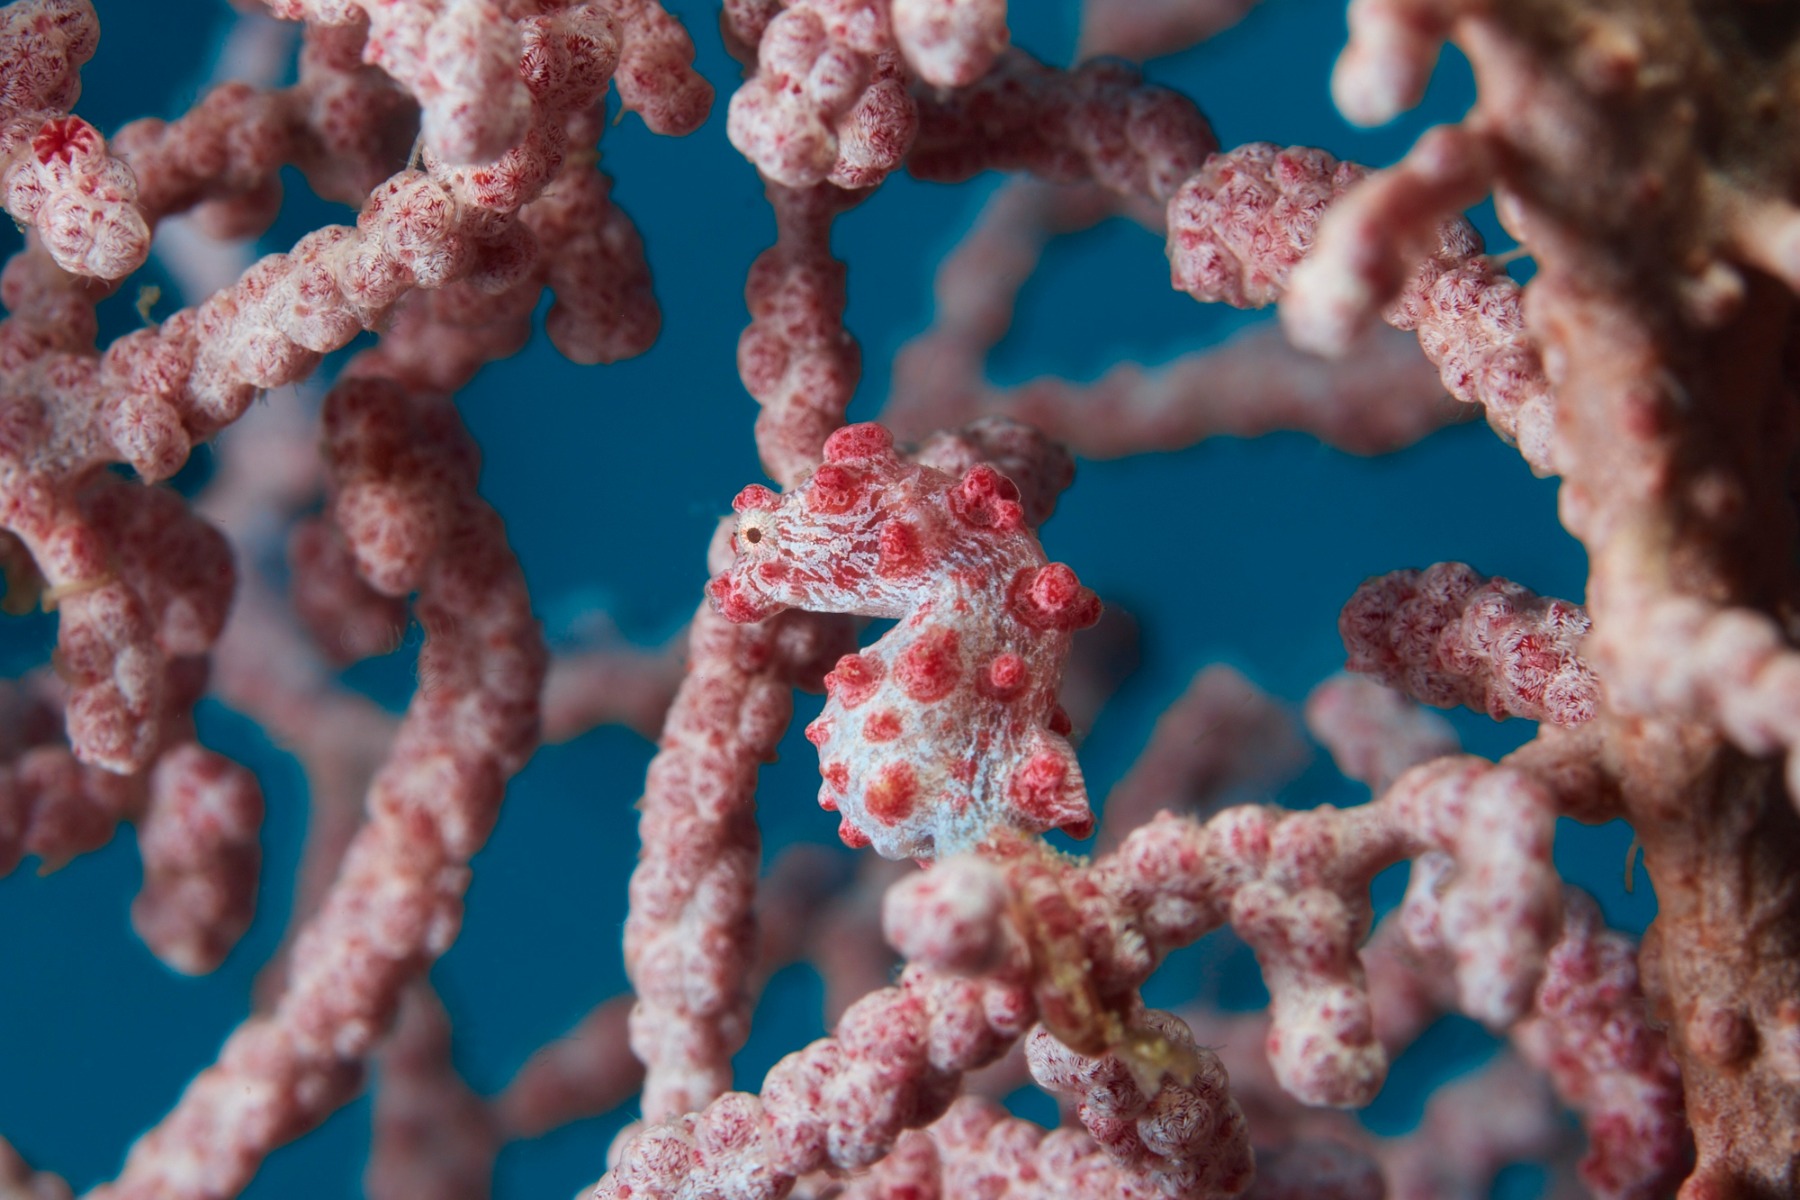 Pygmy Seahorse (Hippocampus bargibanti) with a blue background